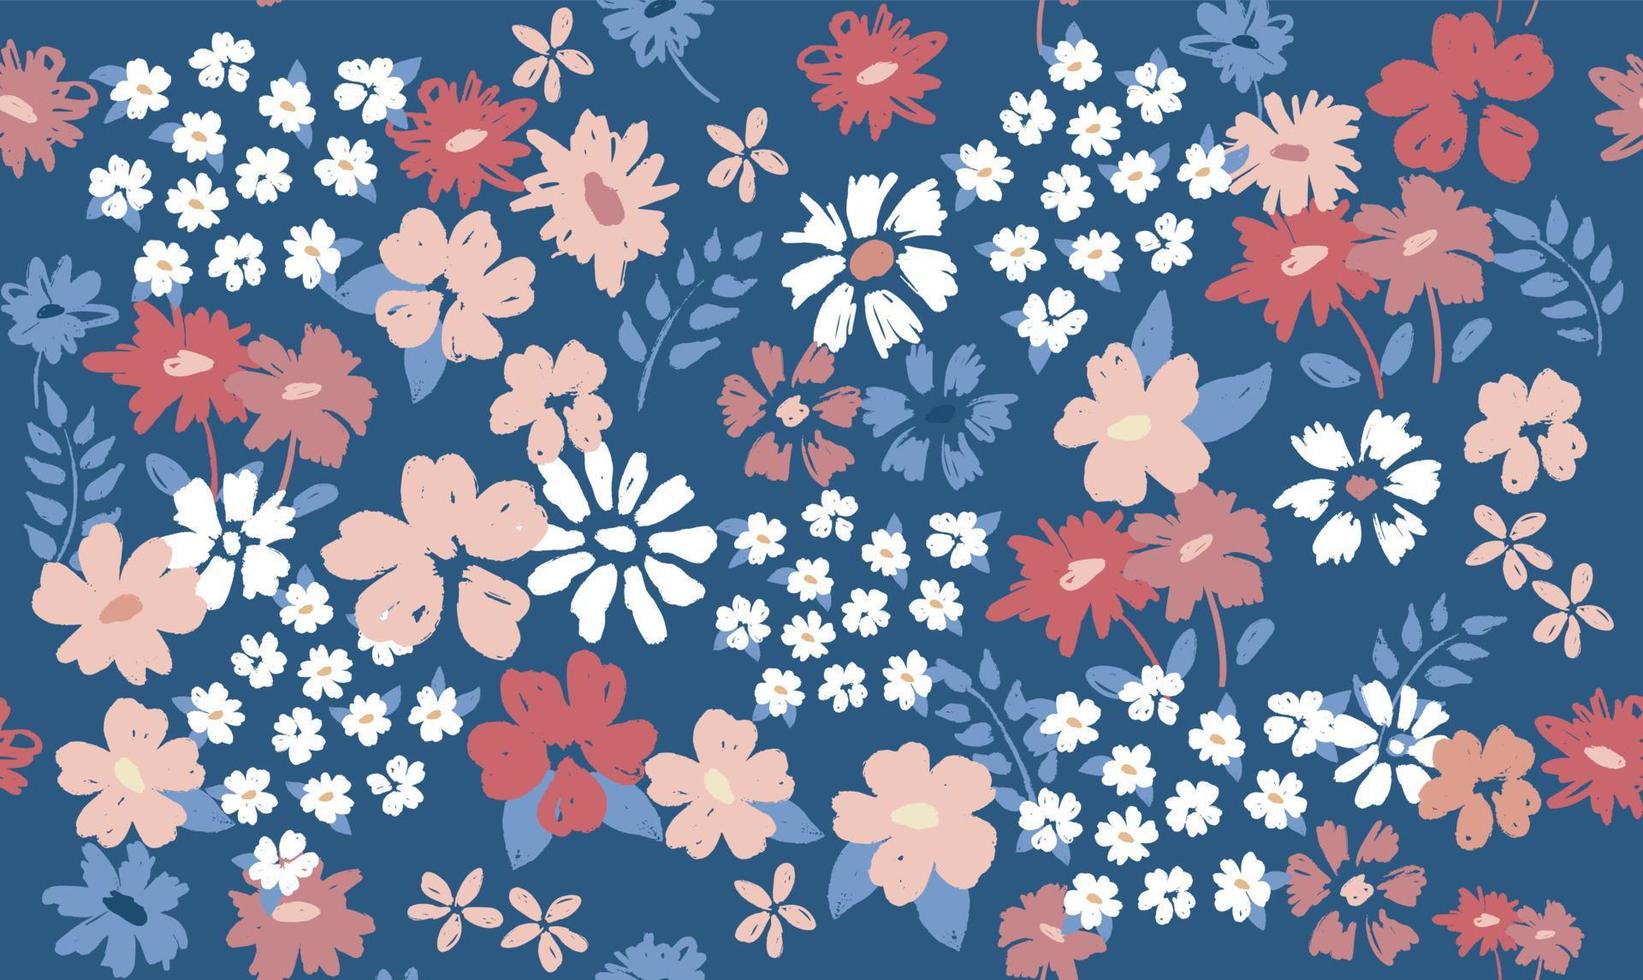 Floral background for textile, swimsuit, wallpaper, pattern covers, surface, gift wrap. vector